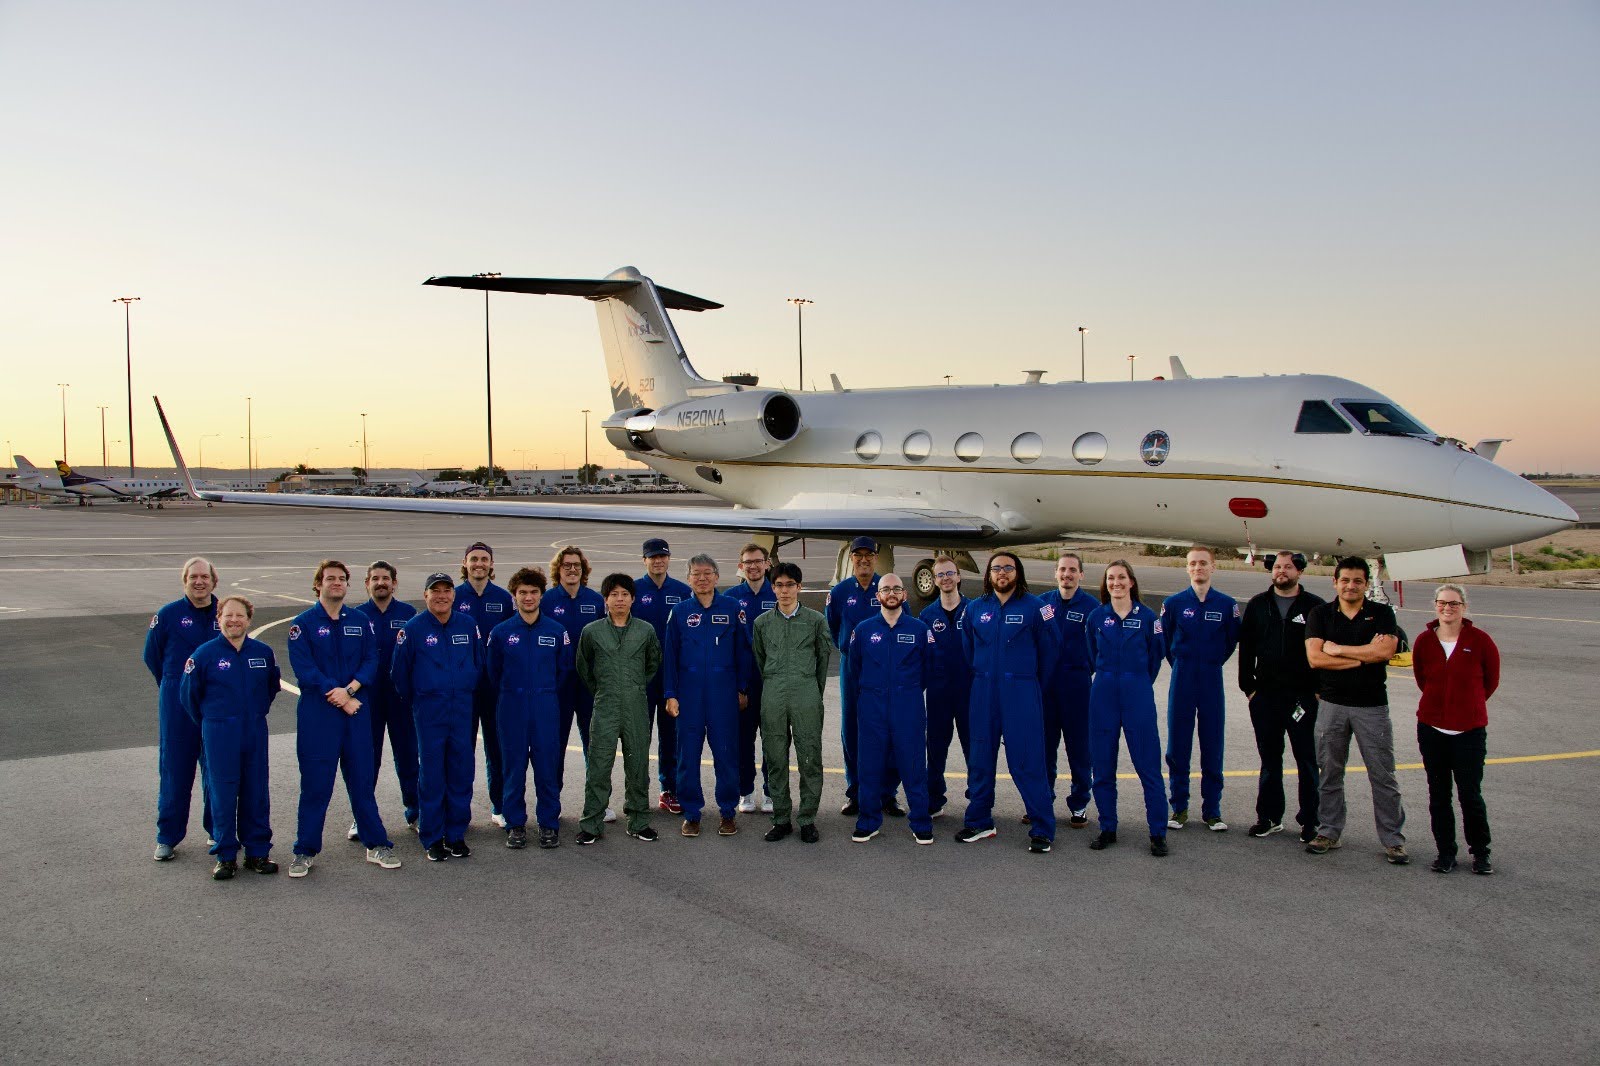 The Hayabusa 2 team in front of the mission's jet.